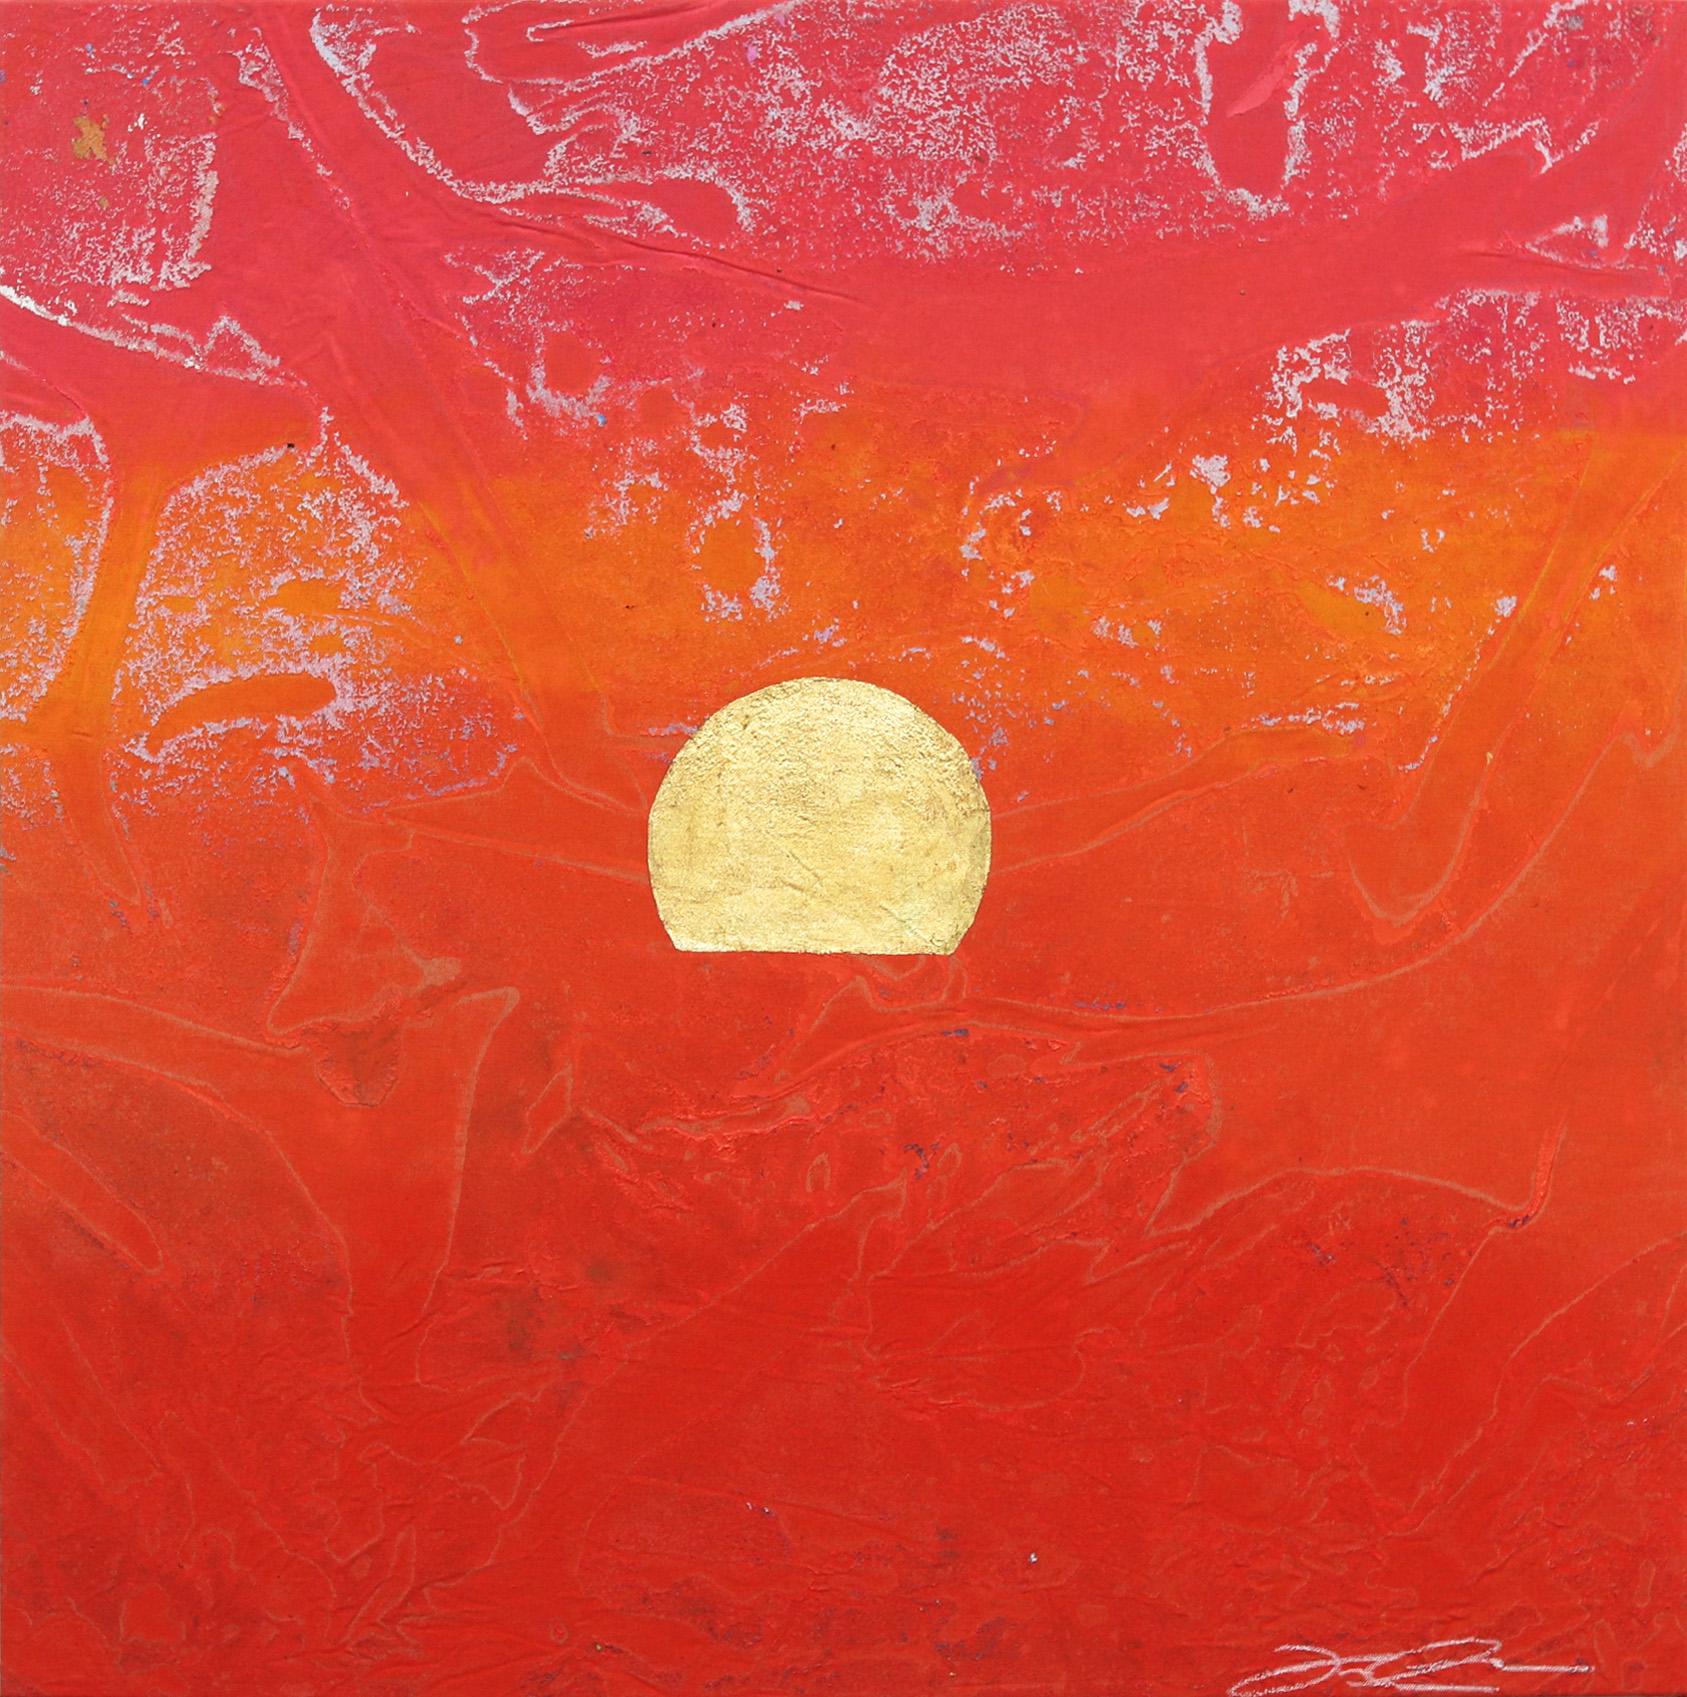 Jason DeMeo Abstract Painting - Concrete Sunset 2 - Bold Meditative Gold Leaf Red Painting on Linen Canvas